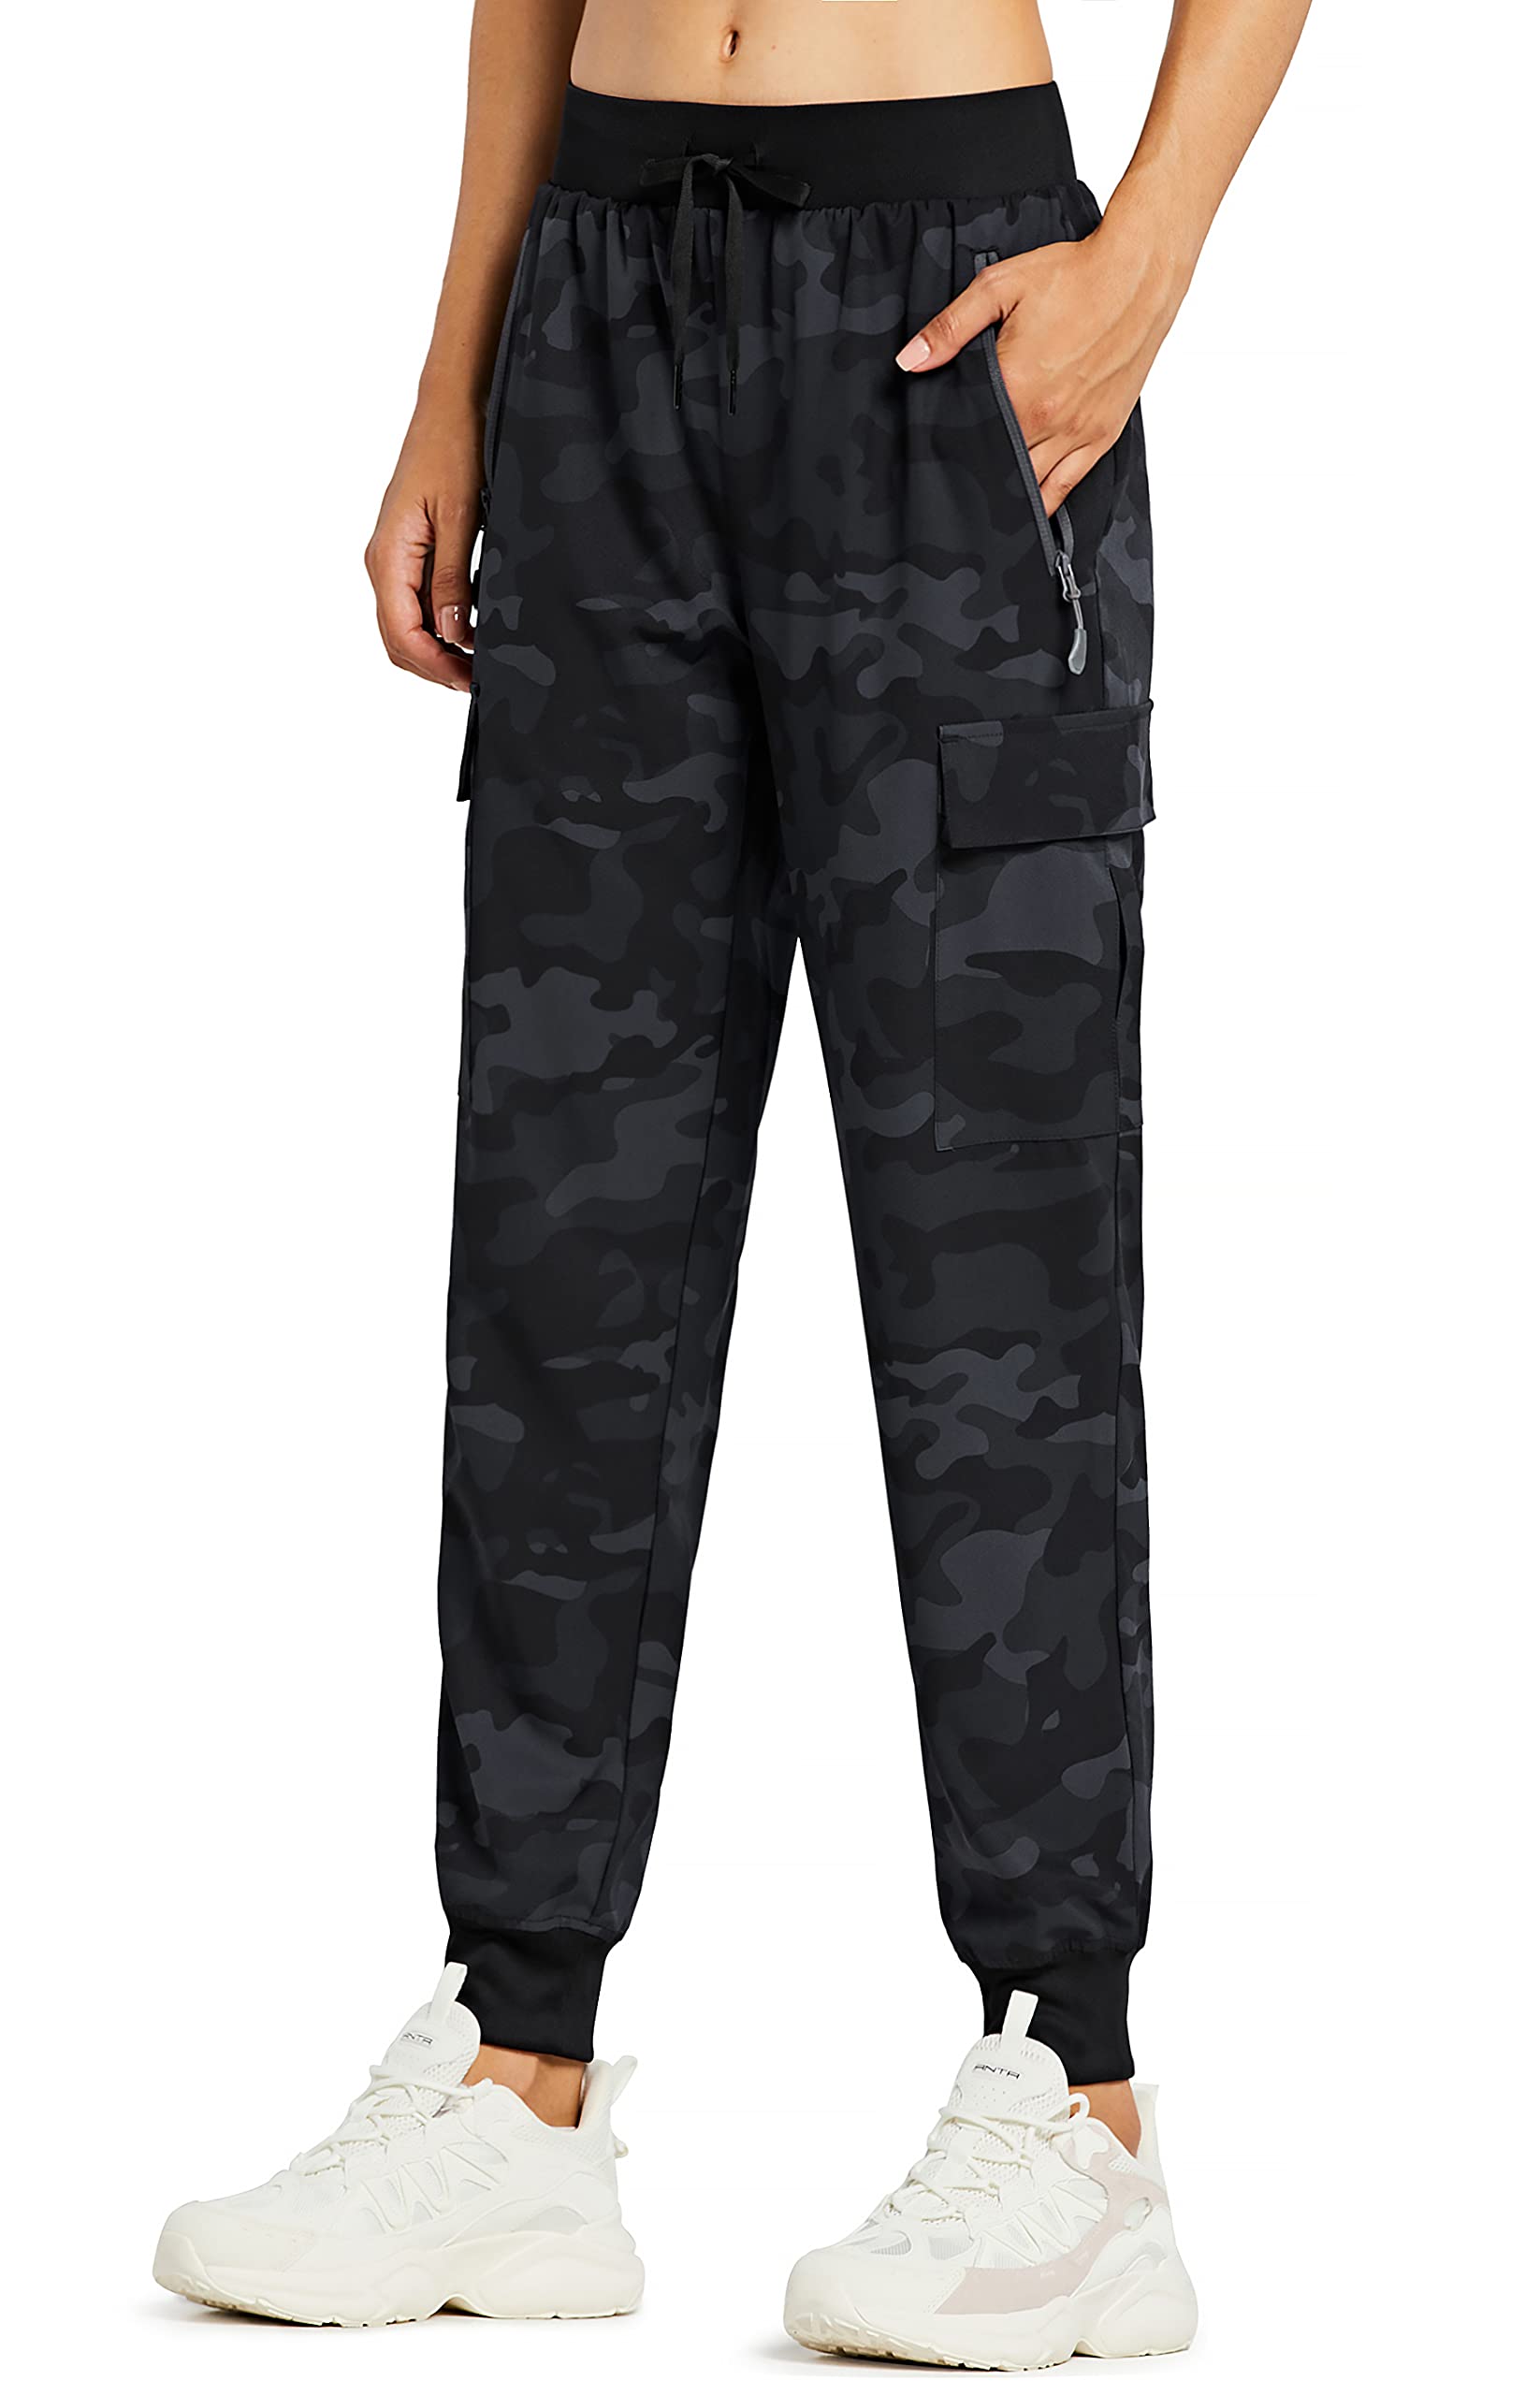 Libin Womens Camo Cargo Joggers Lightweight Quick Dry Hiking Pants Athletic Workout Casual Outdoor, Camo Black Xl